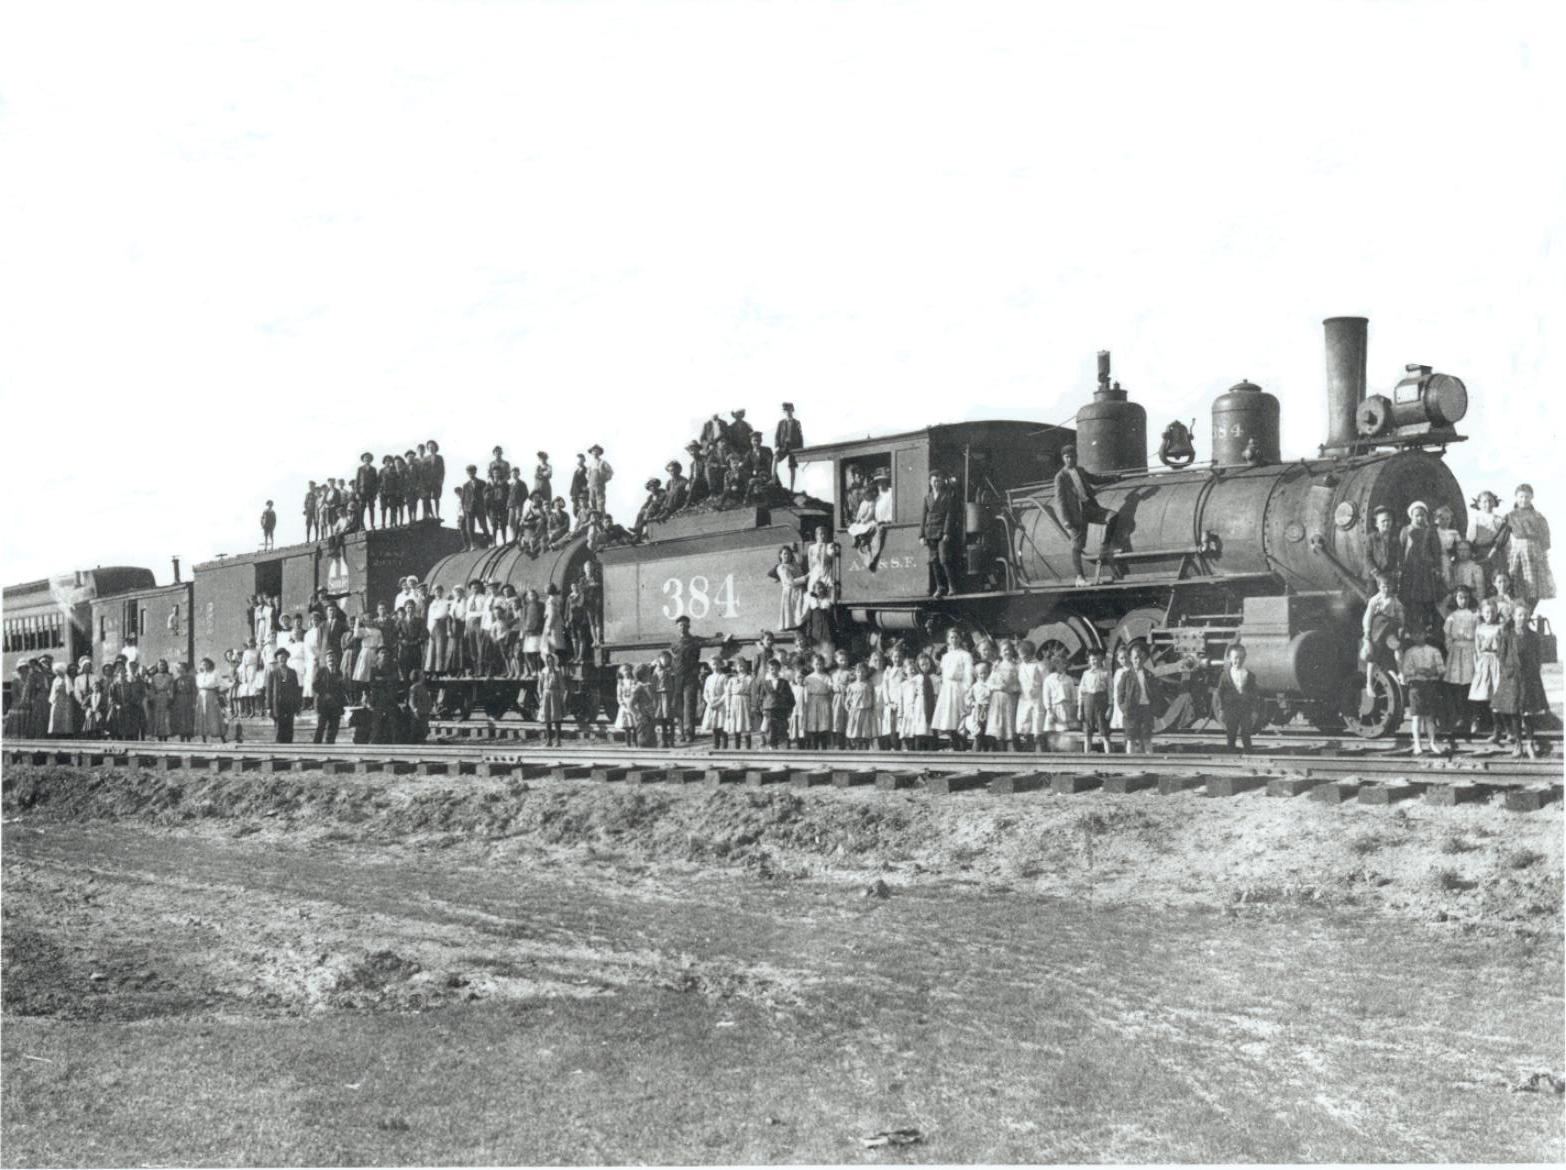 Children standing in front of an Orphan Train